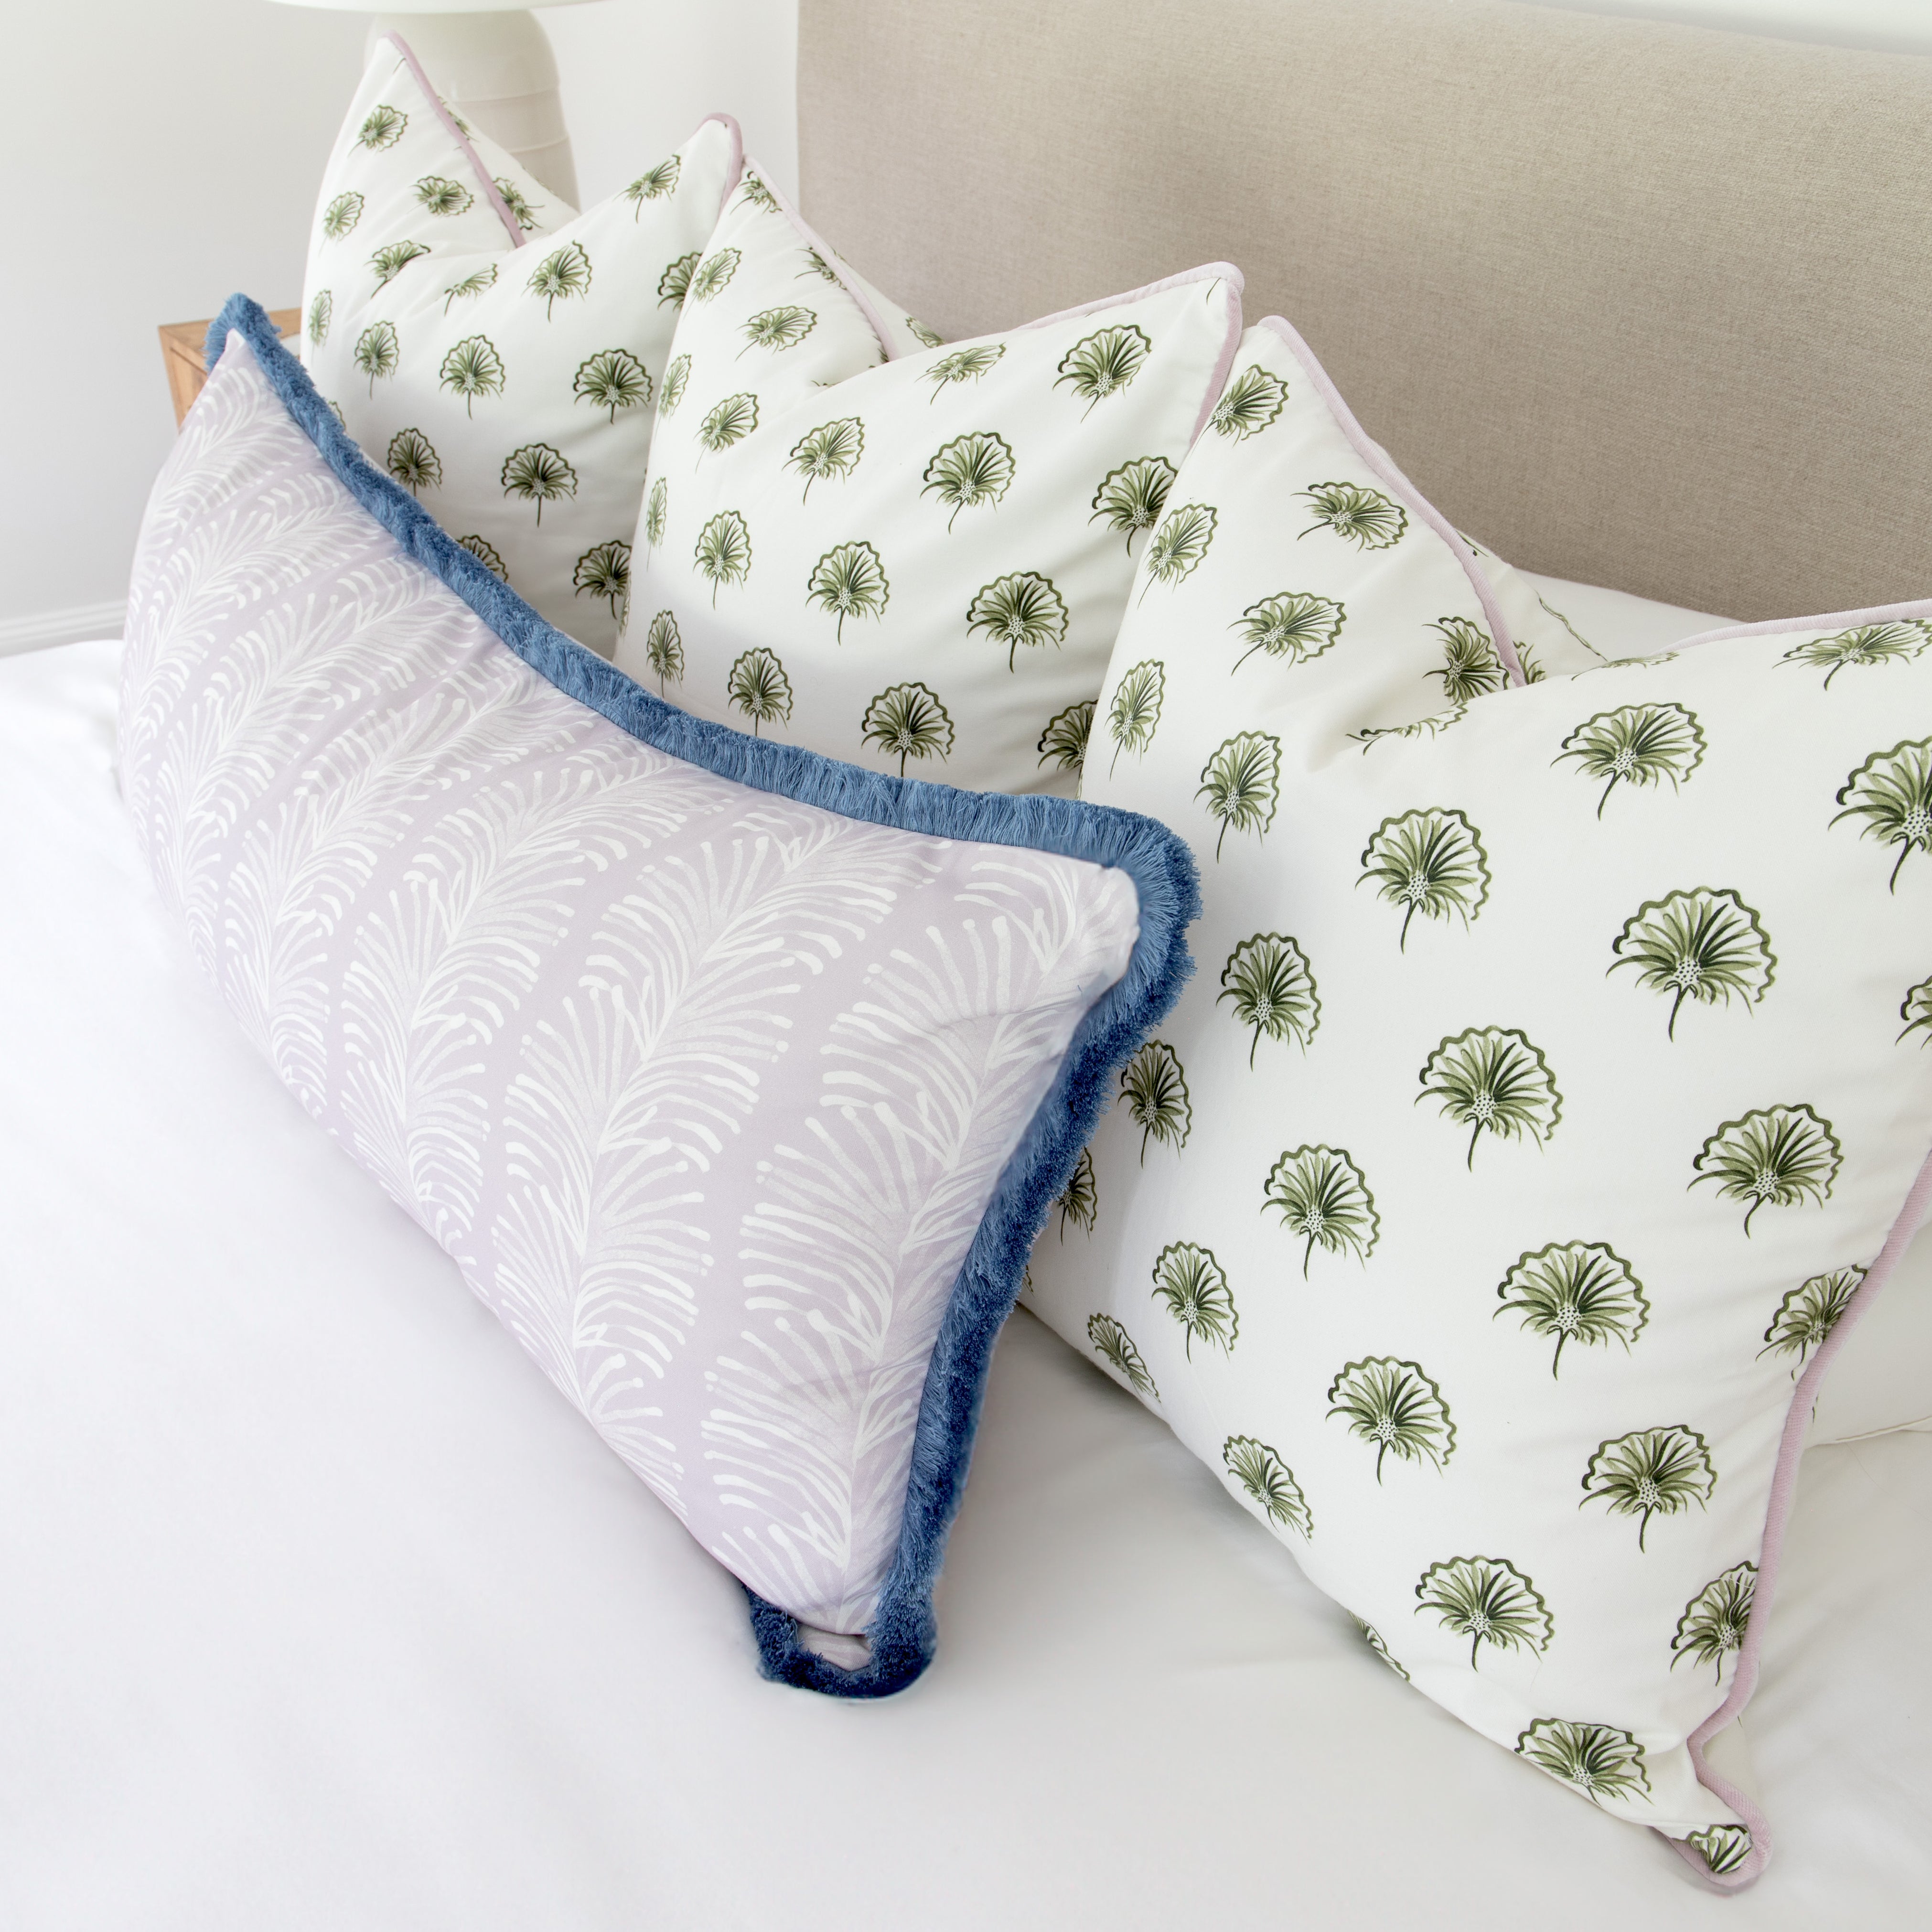 Bedroom close-up with three green floral printed pillows and one Lavender Botanical Stripe printed lumbar with blue fringe on top of white bed